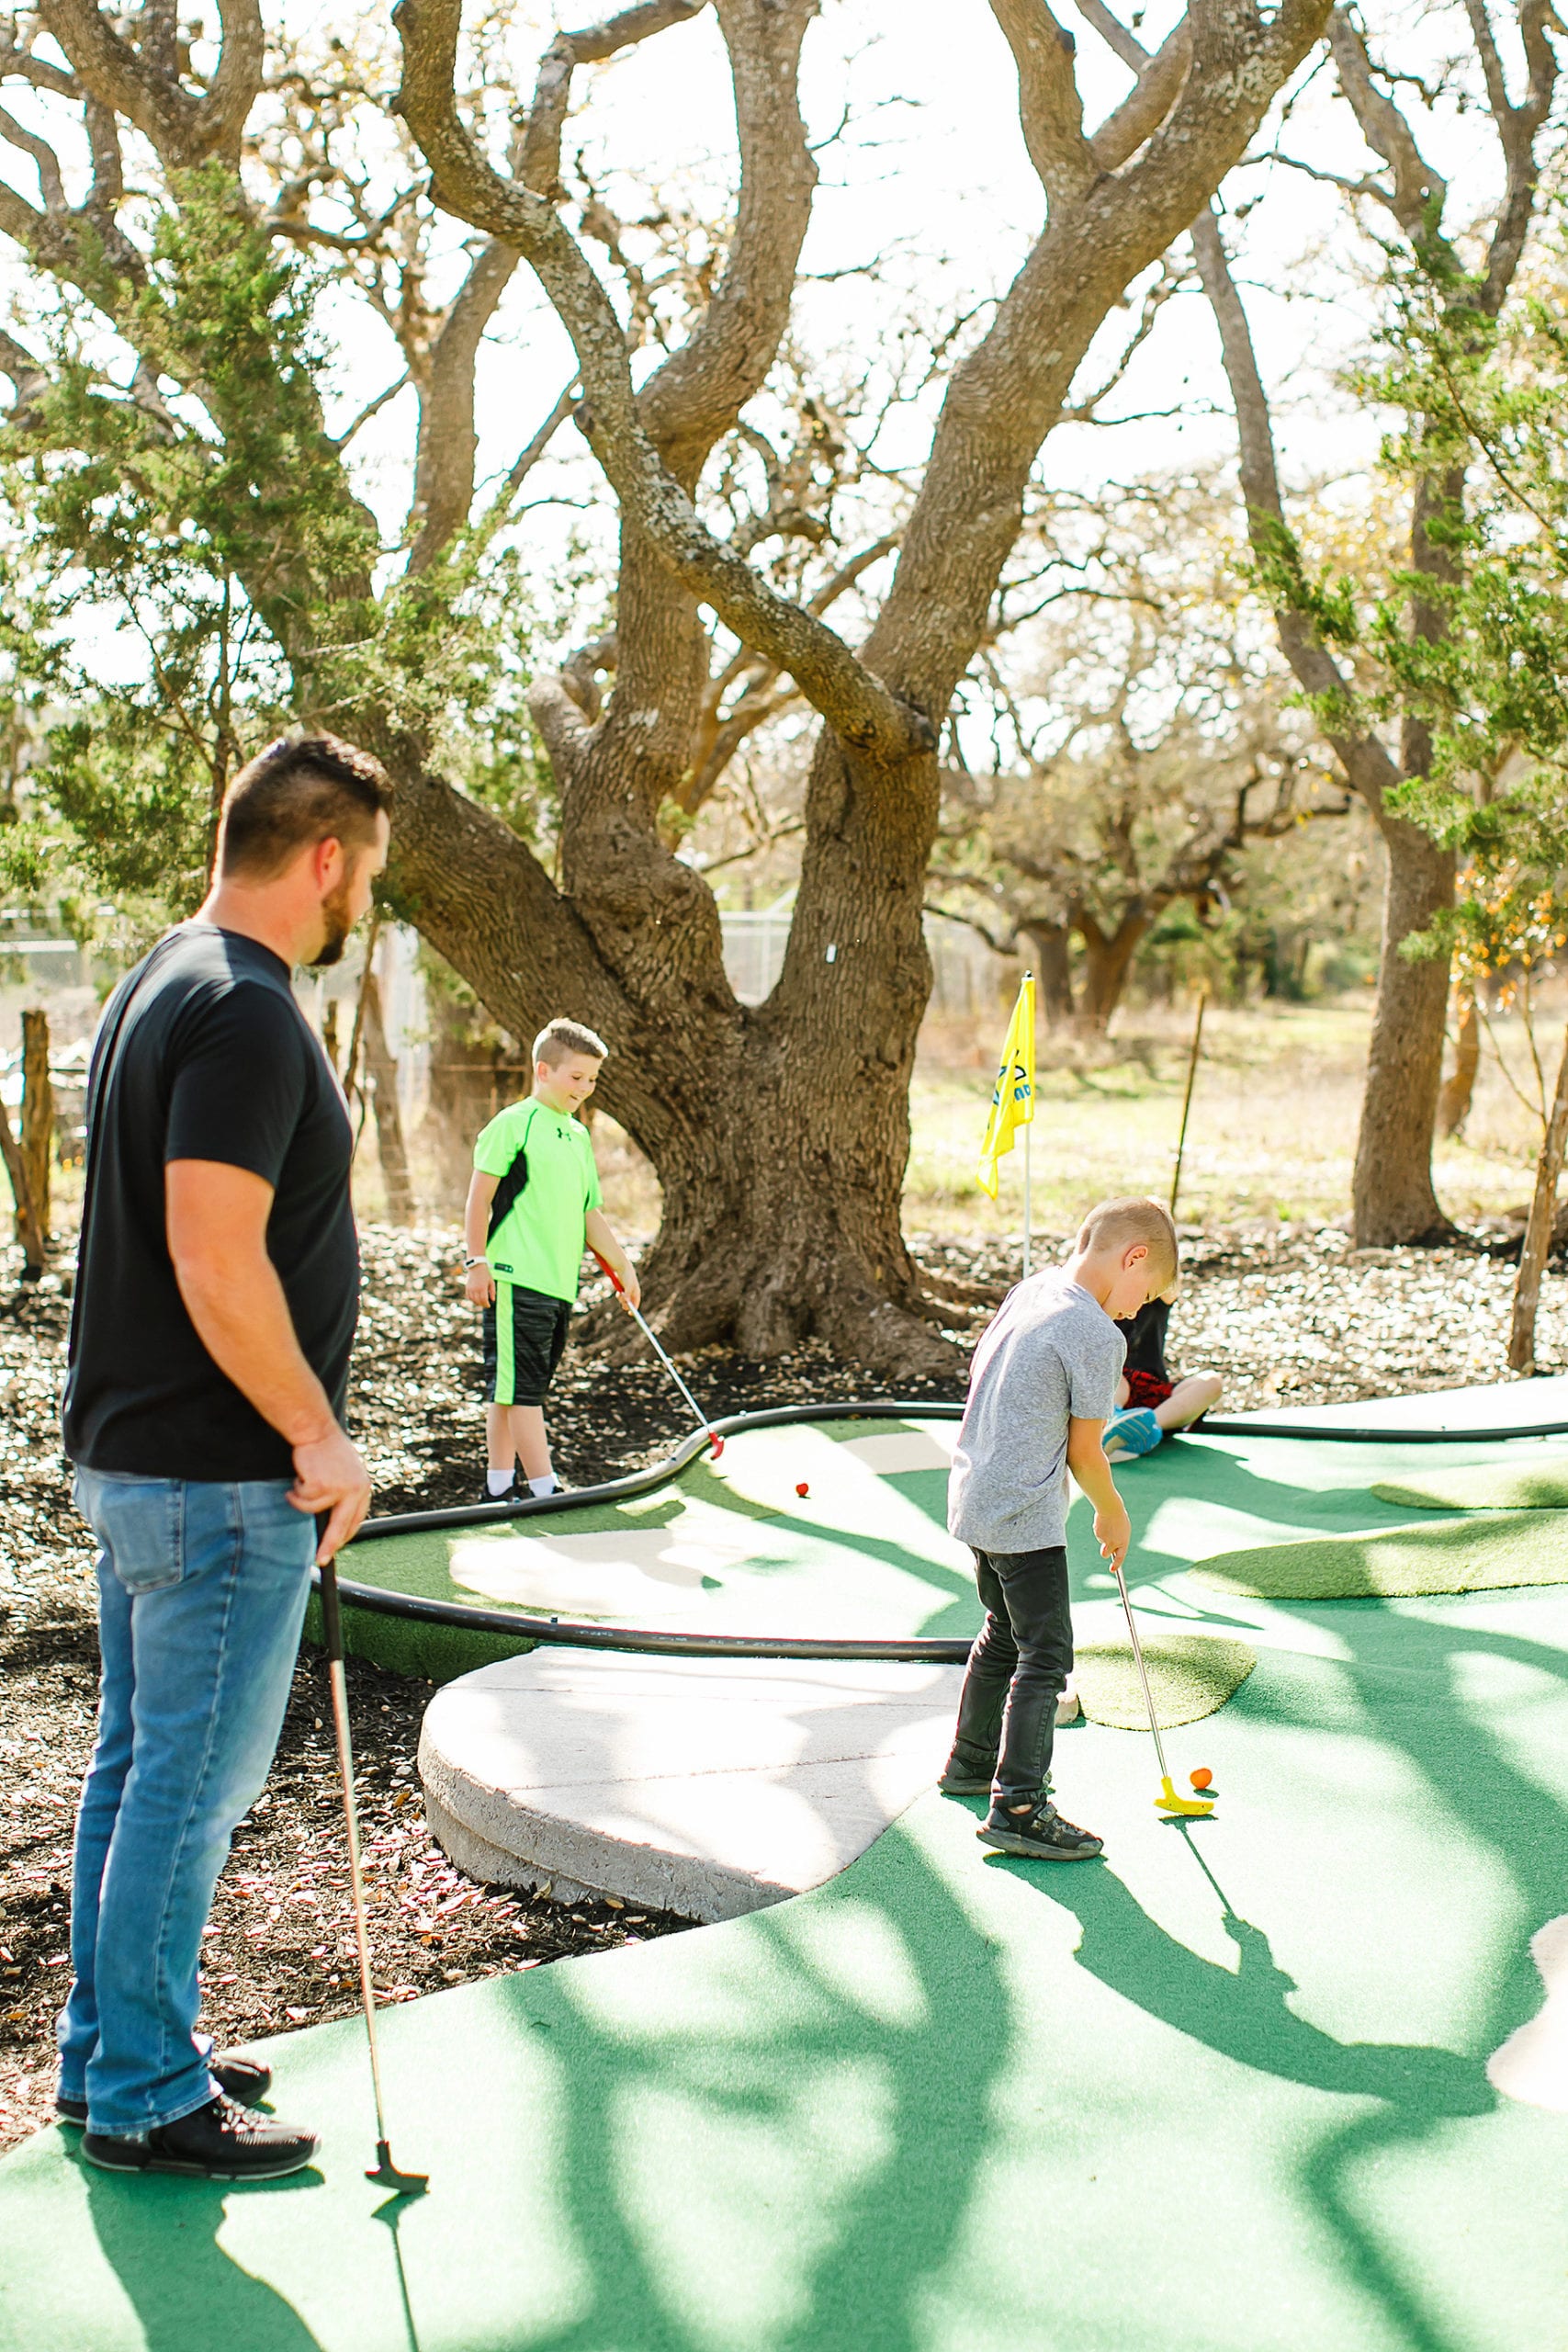 Family plays at Dreamland outdoor mini golf in Dripping Springs